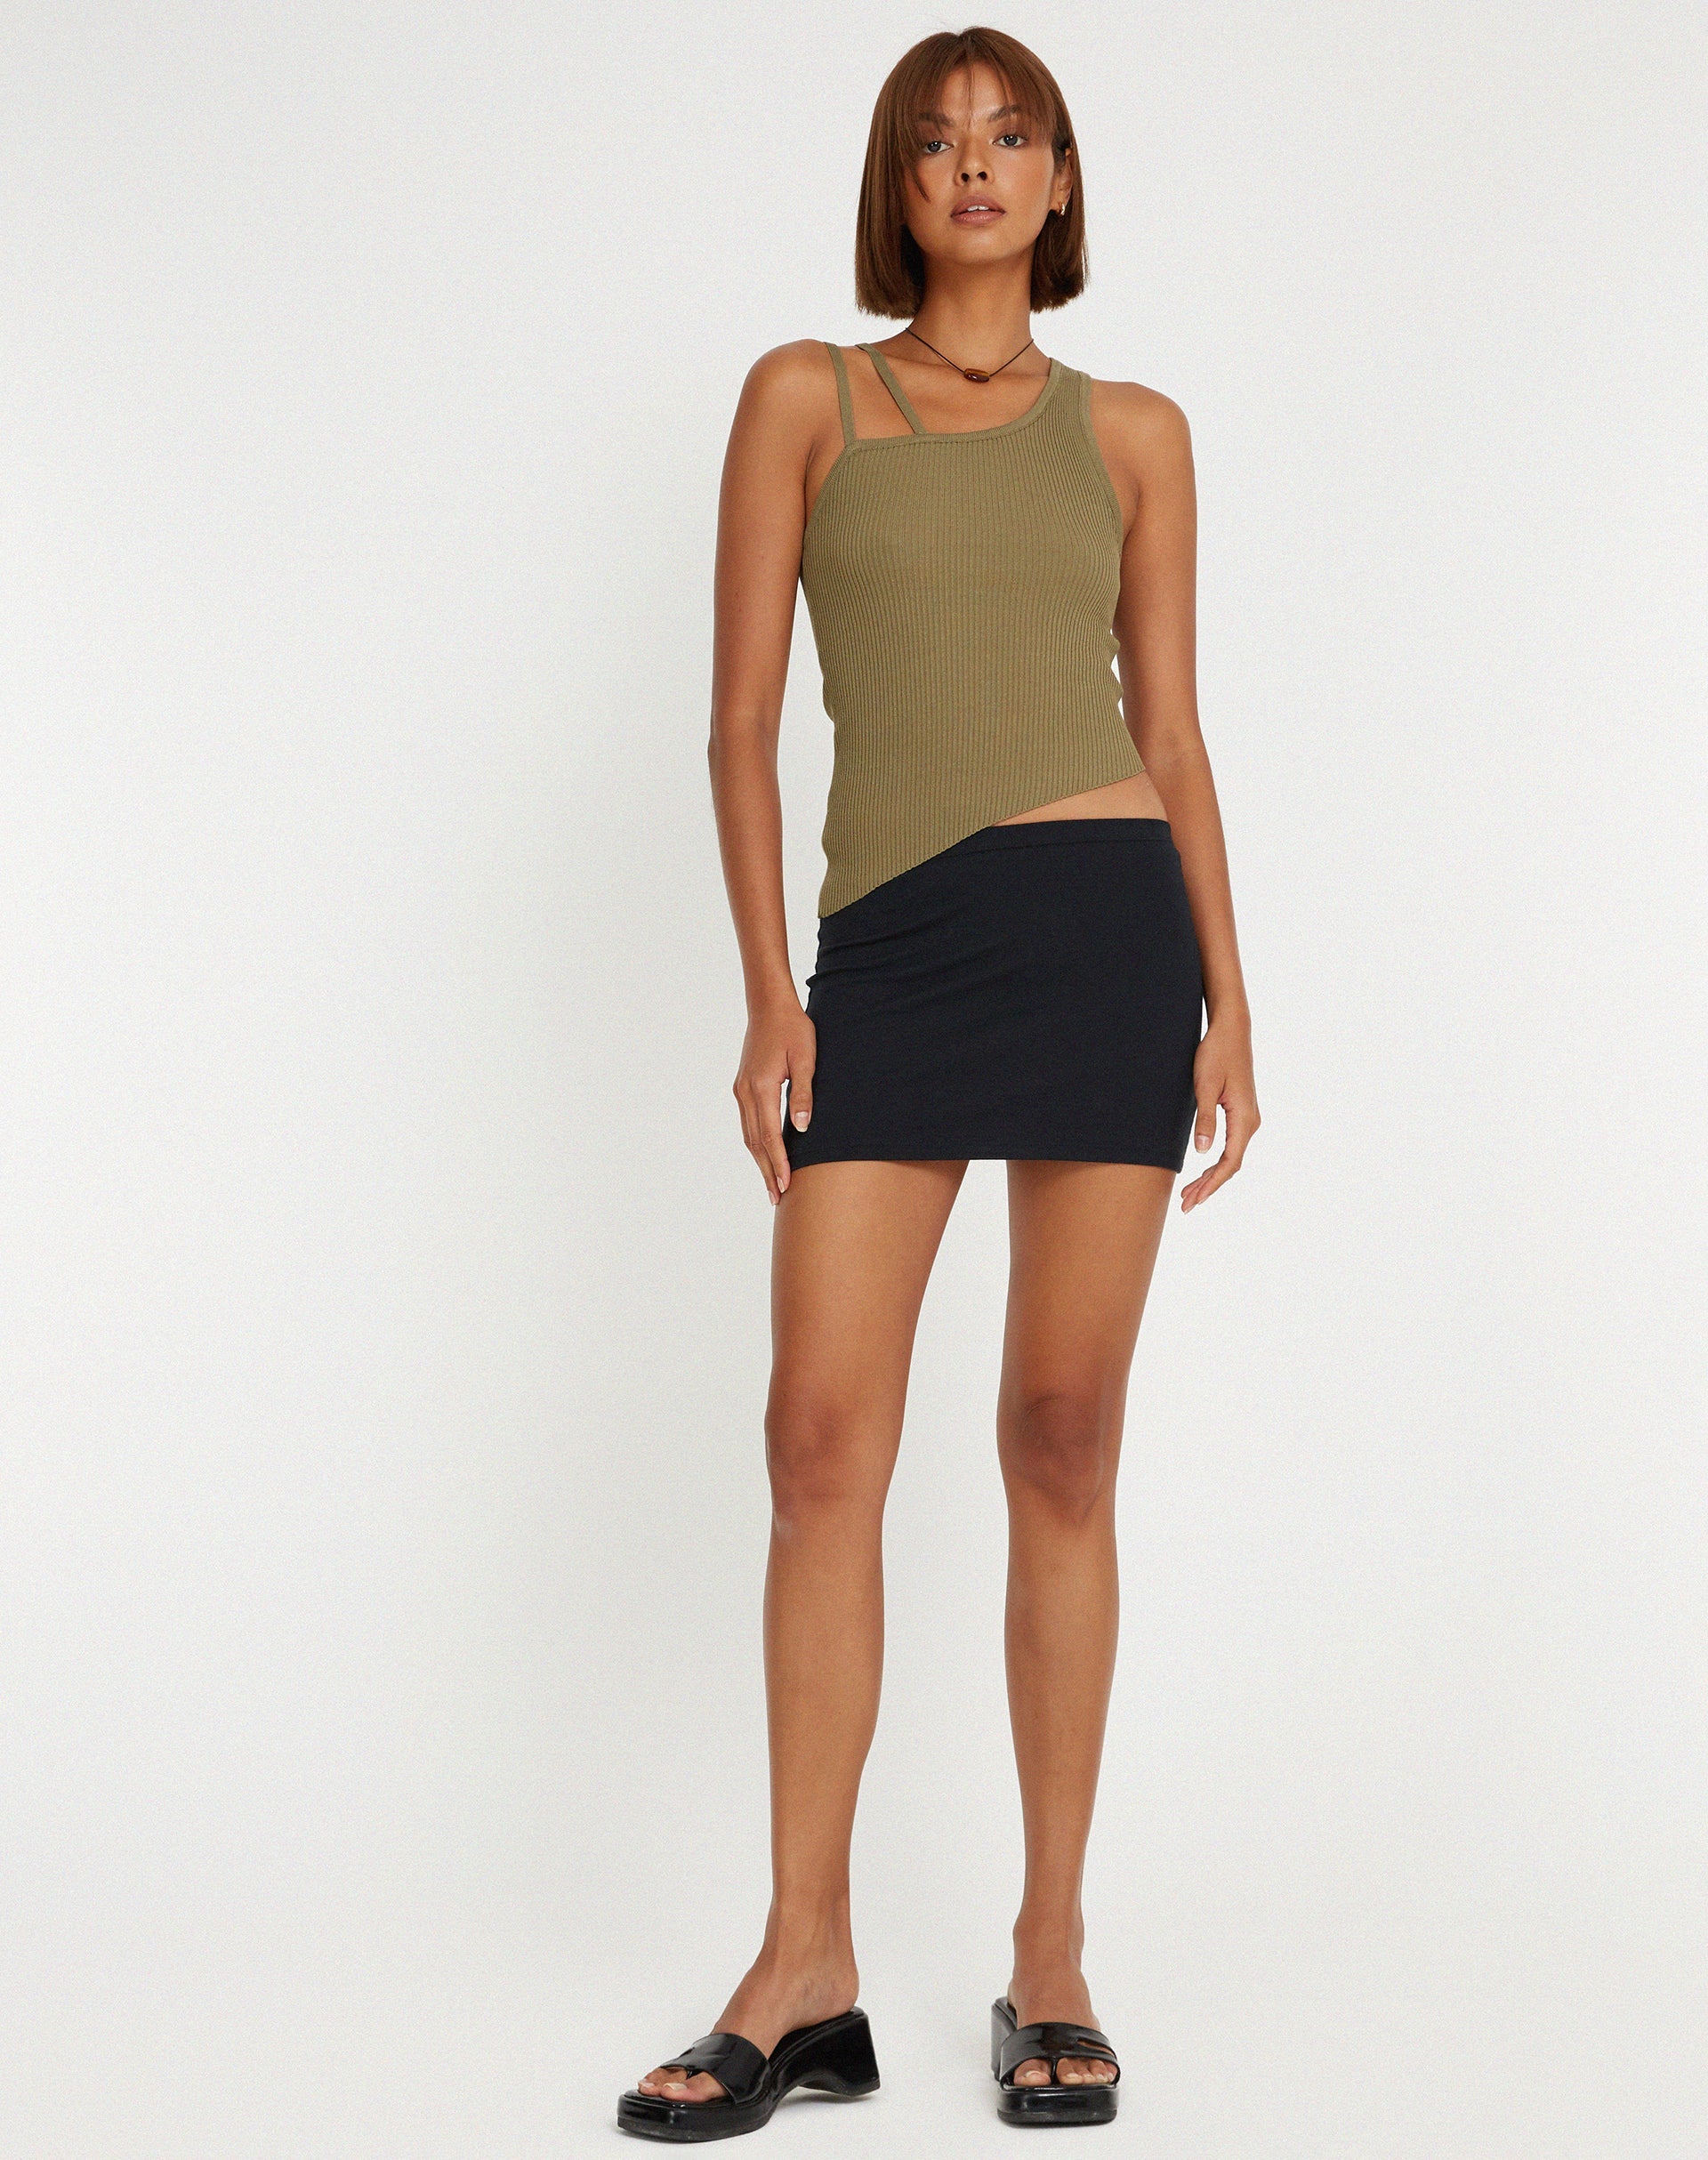 image of Lanica Top in Olivea